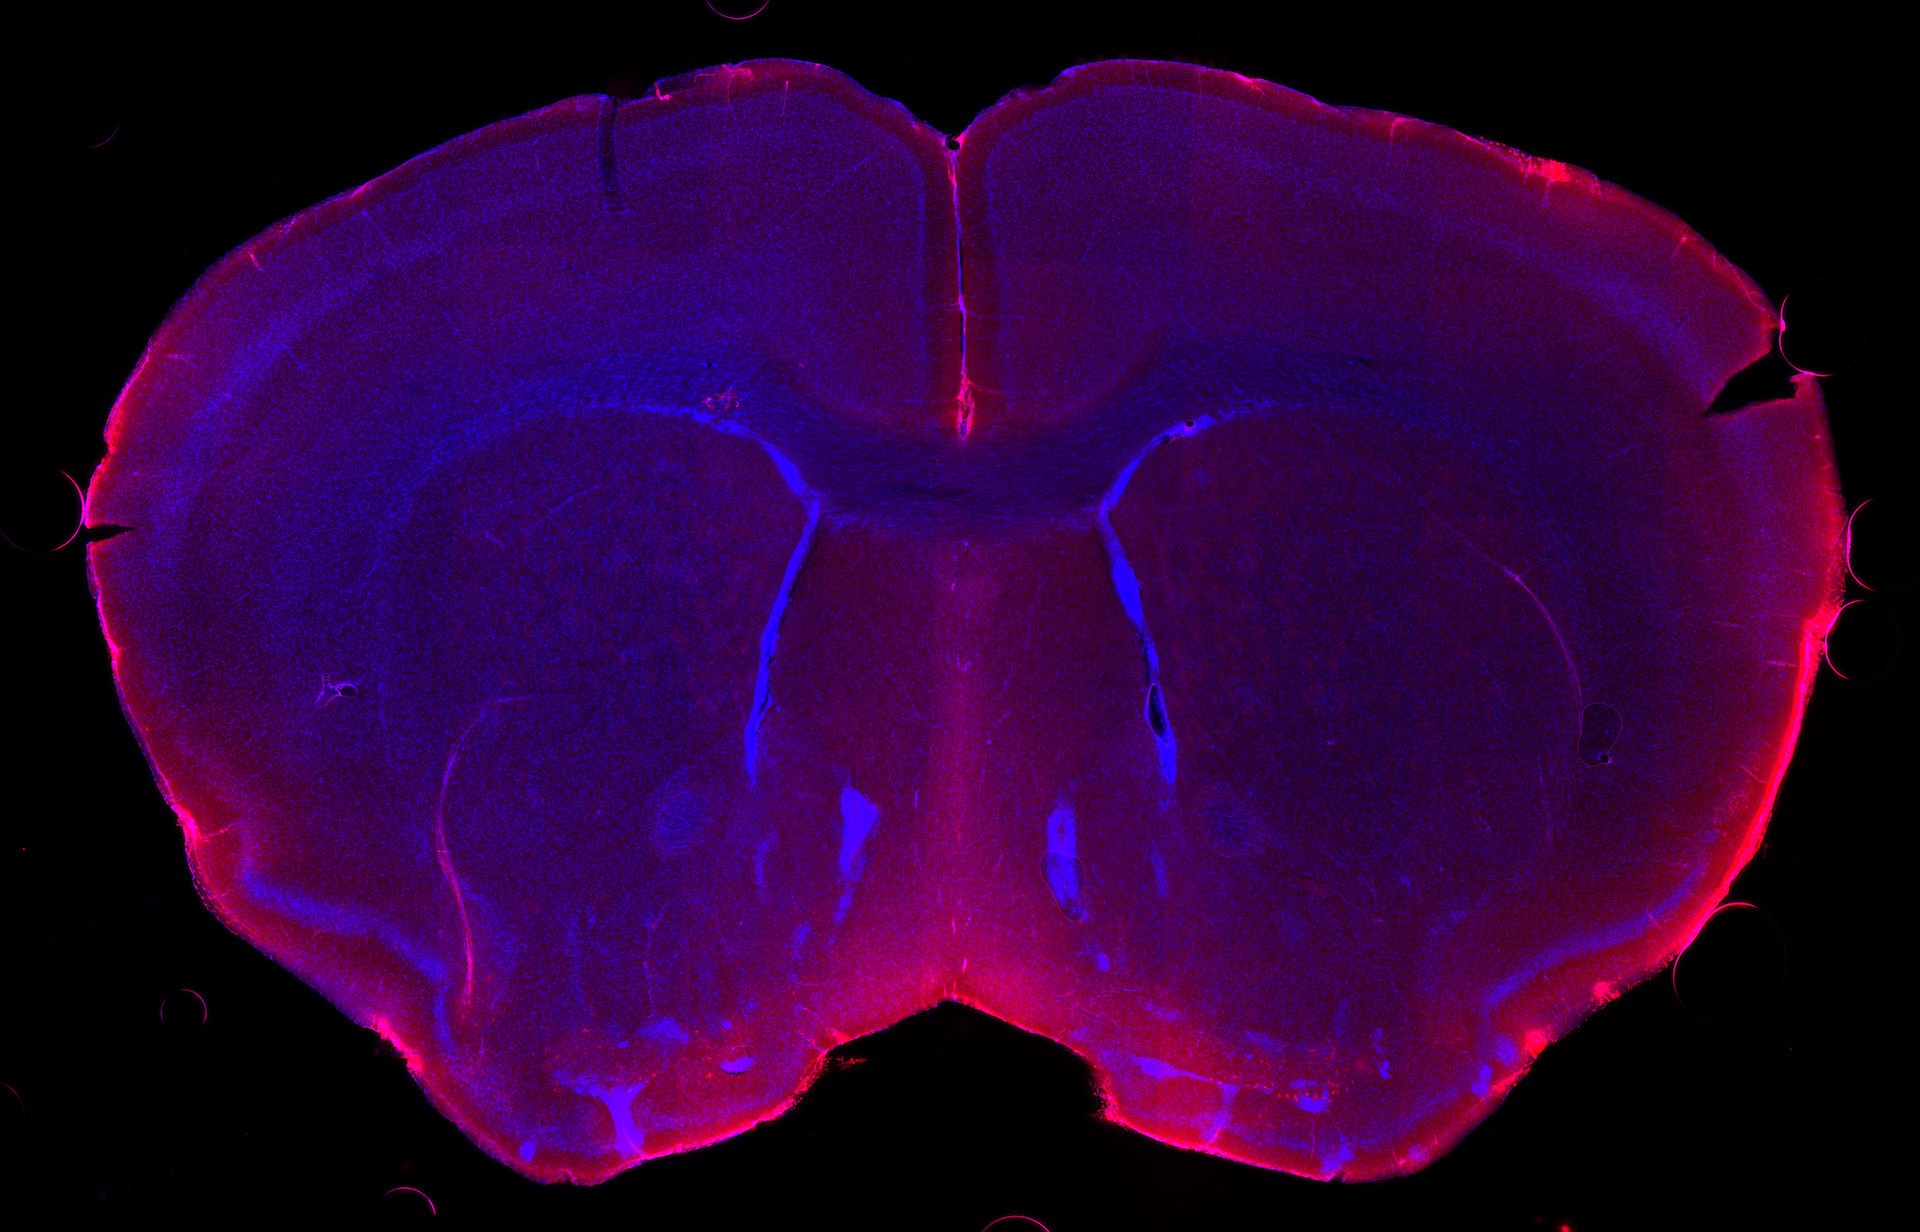 Cerebrospinal fluid (colored red) seeps into the brain tissue (blue) through tiny gaps in the blood vessels that run through the brain’s protective layers. 